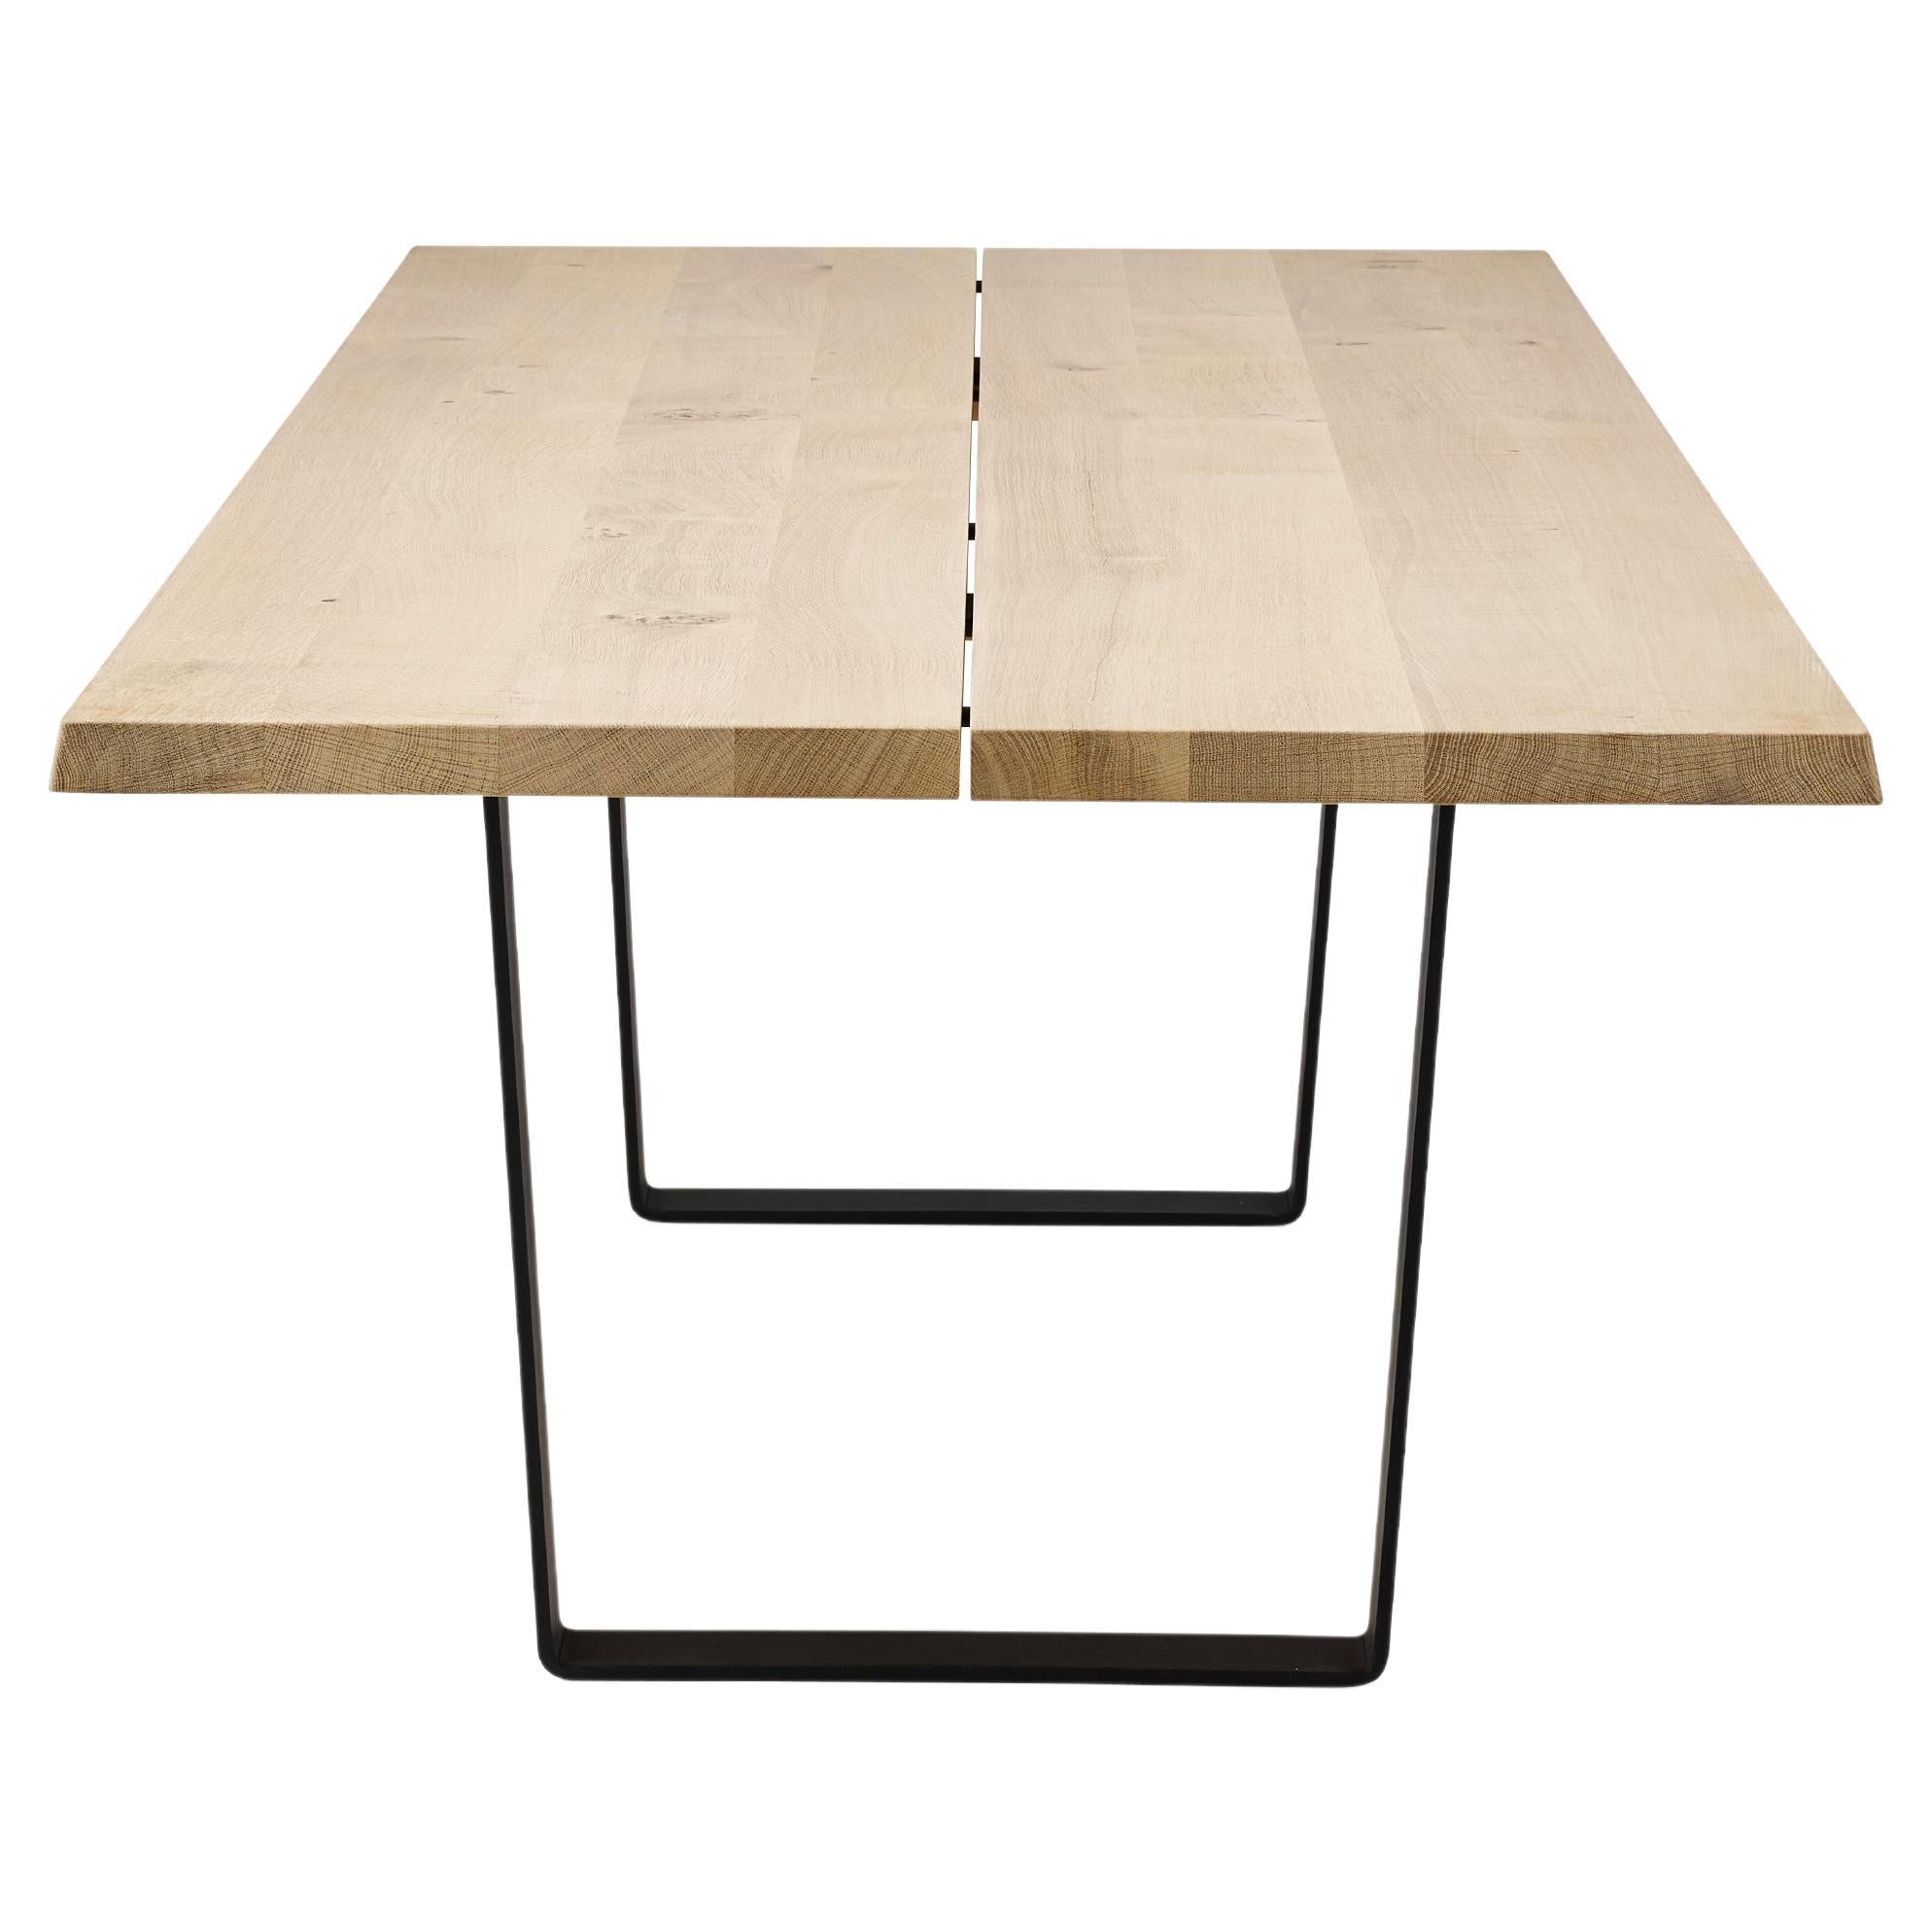 Lowlight Dining table, rectangular, 340 cm.

Solid wood tabletop and black powder coated steel legs. 
Handmade in Denmark.

Measure: Height: 72 or 74 cm

Tabletop dimensions:
– 180 x 100 cm
– 200 x 100 cm
– 220 x 100 cm
– 240 x 100 cm
–